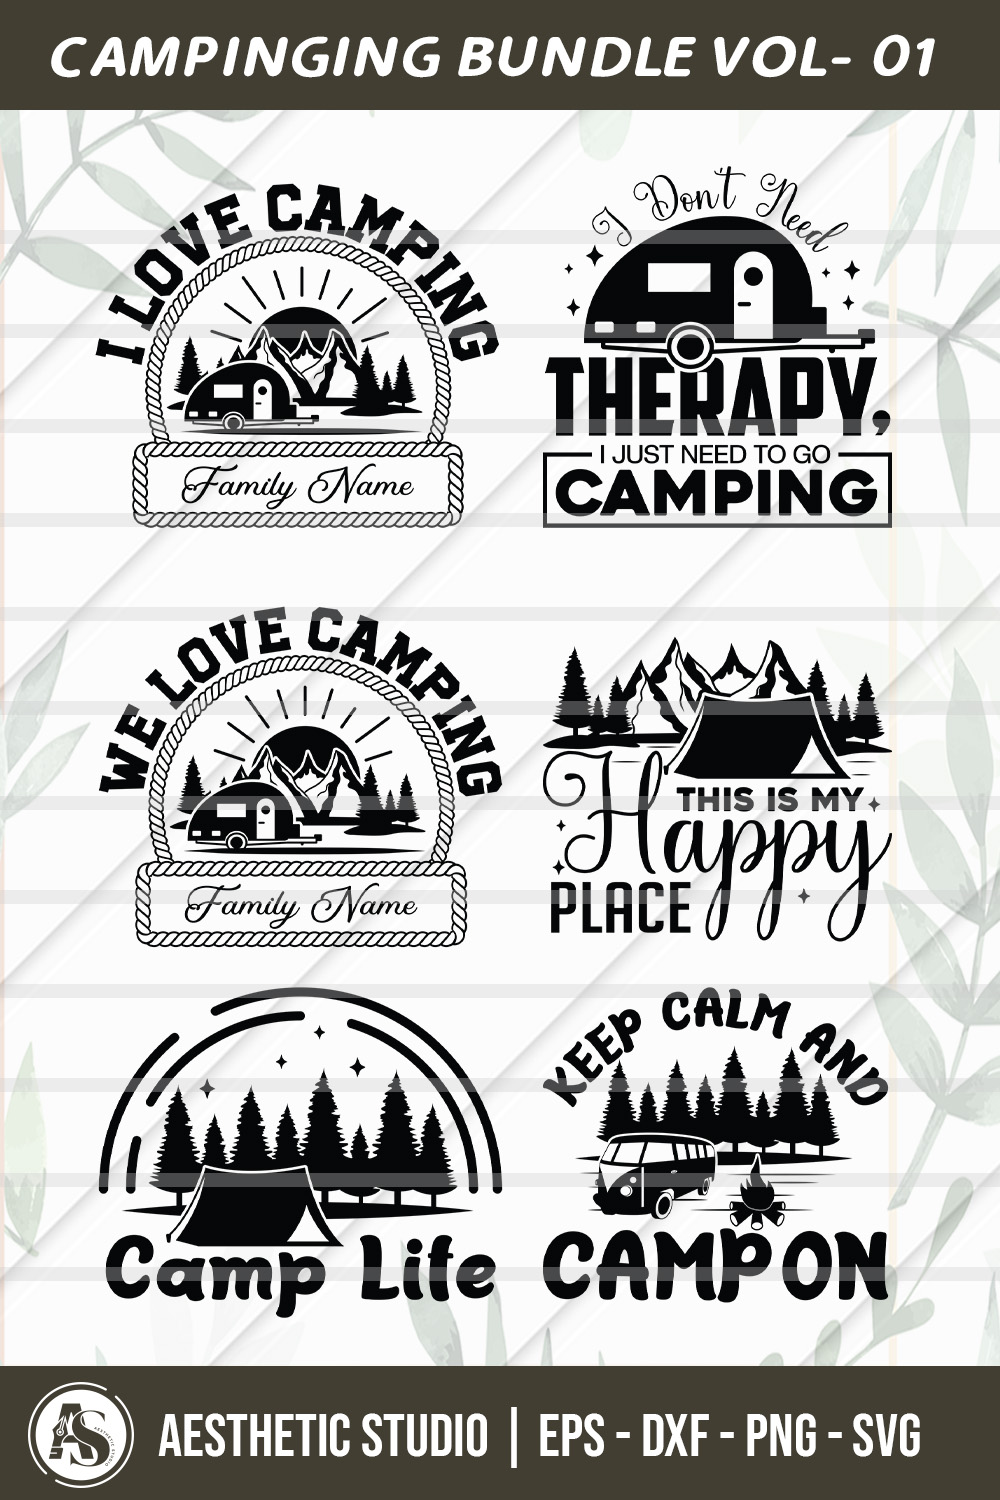 Camping Bundle, I love Camping, Camp Life, We Love Camping, This Is My Happy Place, Keep Calm And Camp On, Camping Svg, SVG, Camping Quotes, Camping Bundle design, Svg, Eps, Dxf, Png, Cut file pinterest preview image.